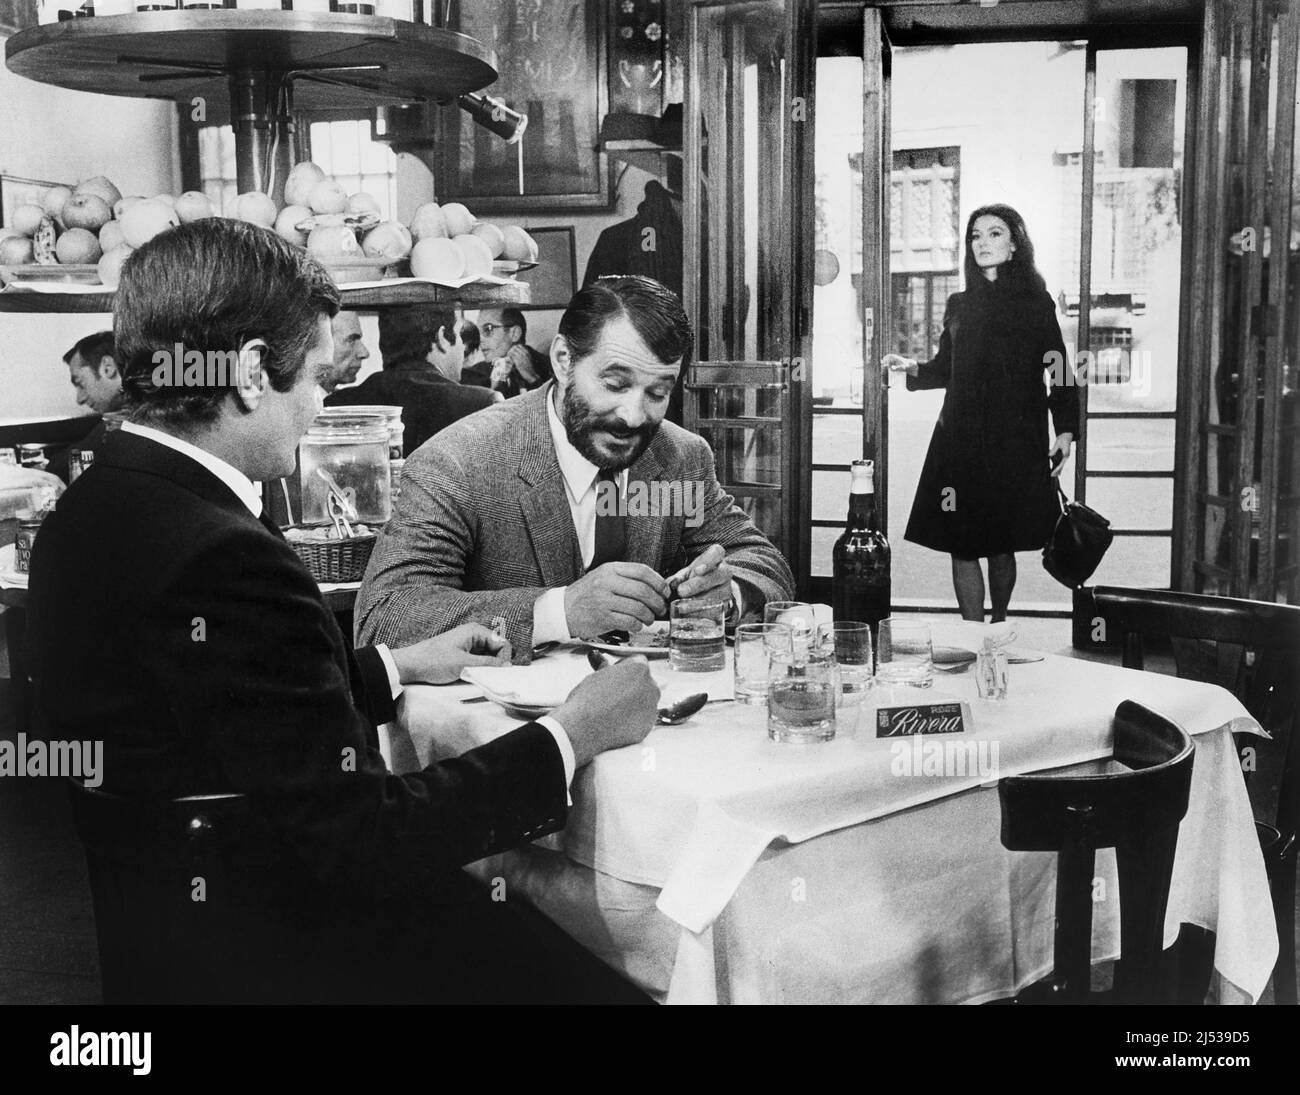 Omar Sharif, Fausto Fozzi, Amouk Aimee, on-set of the Film, "The Appointment", MGM, 1969 Stock Photo